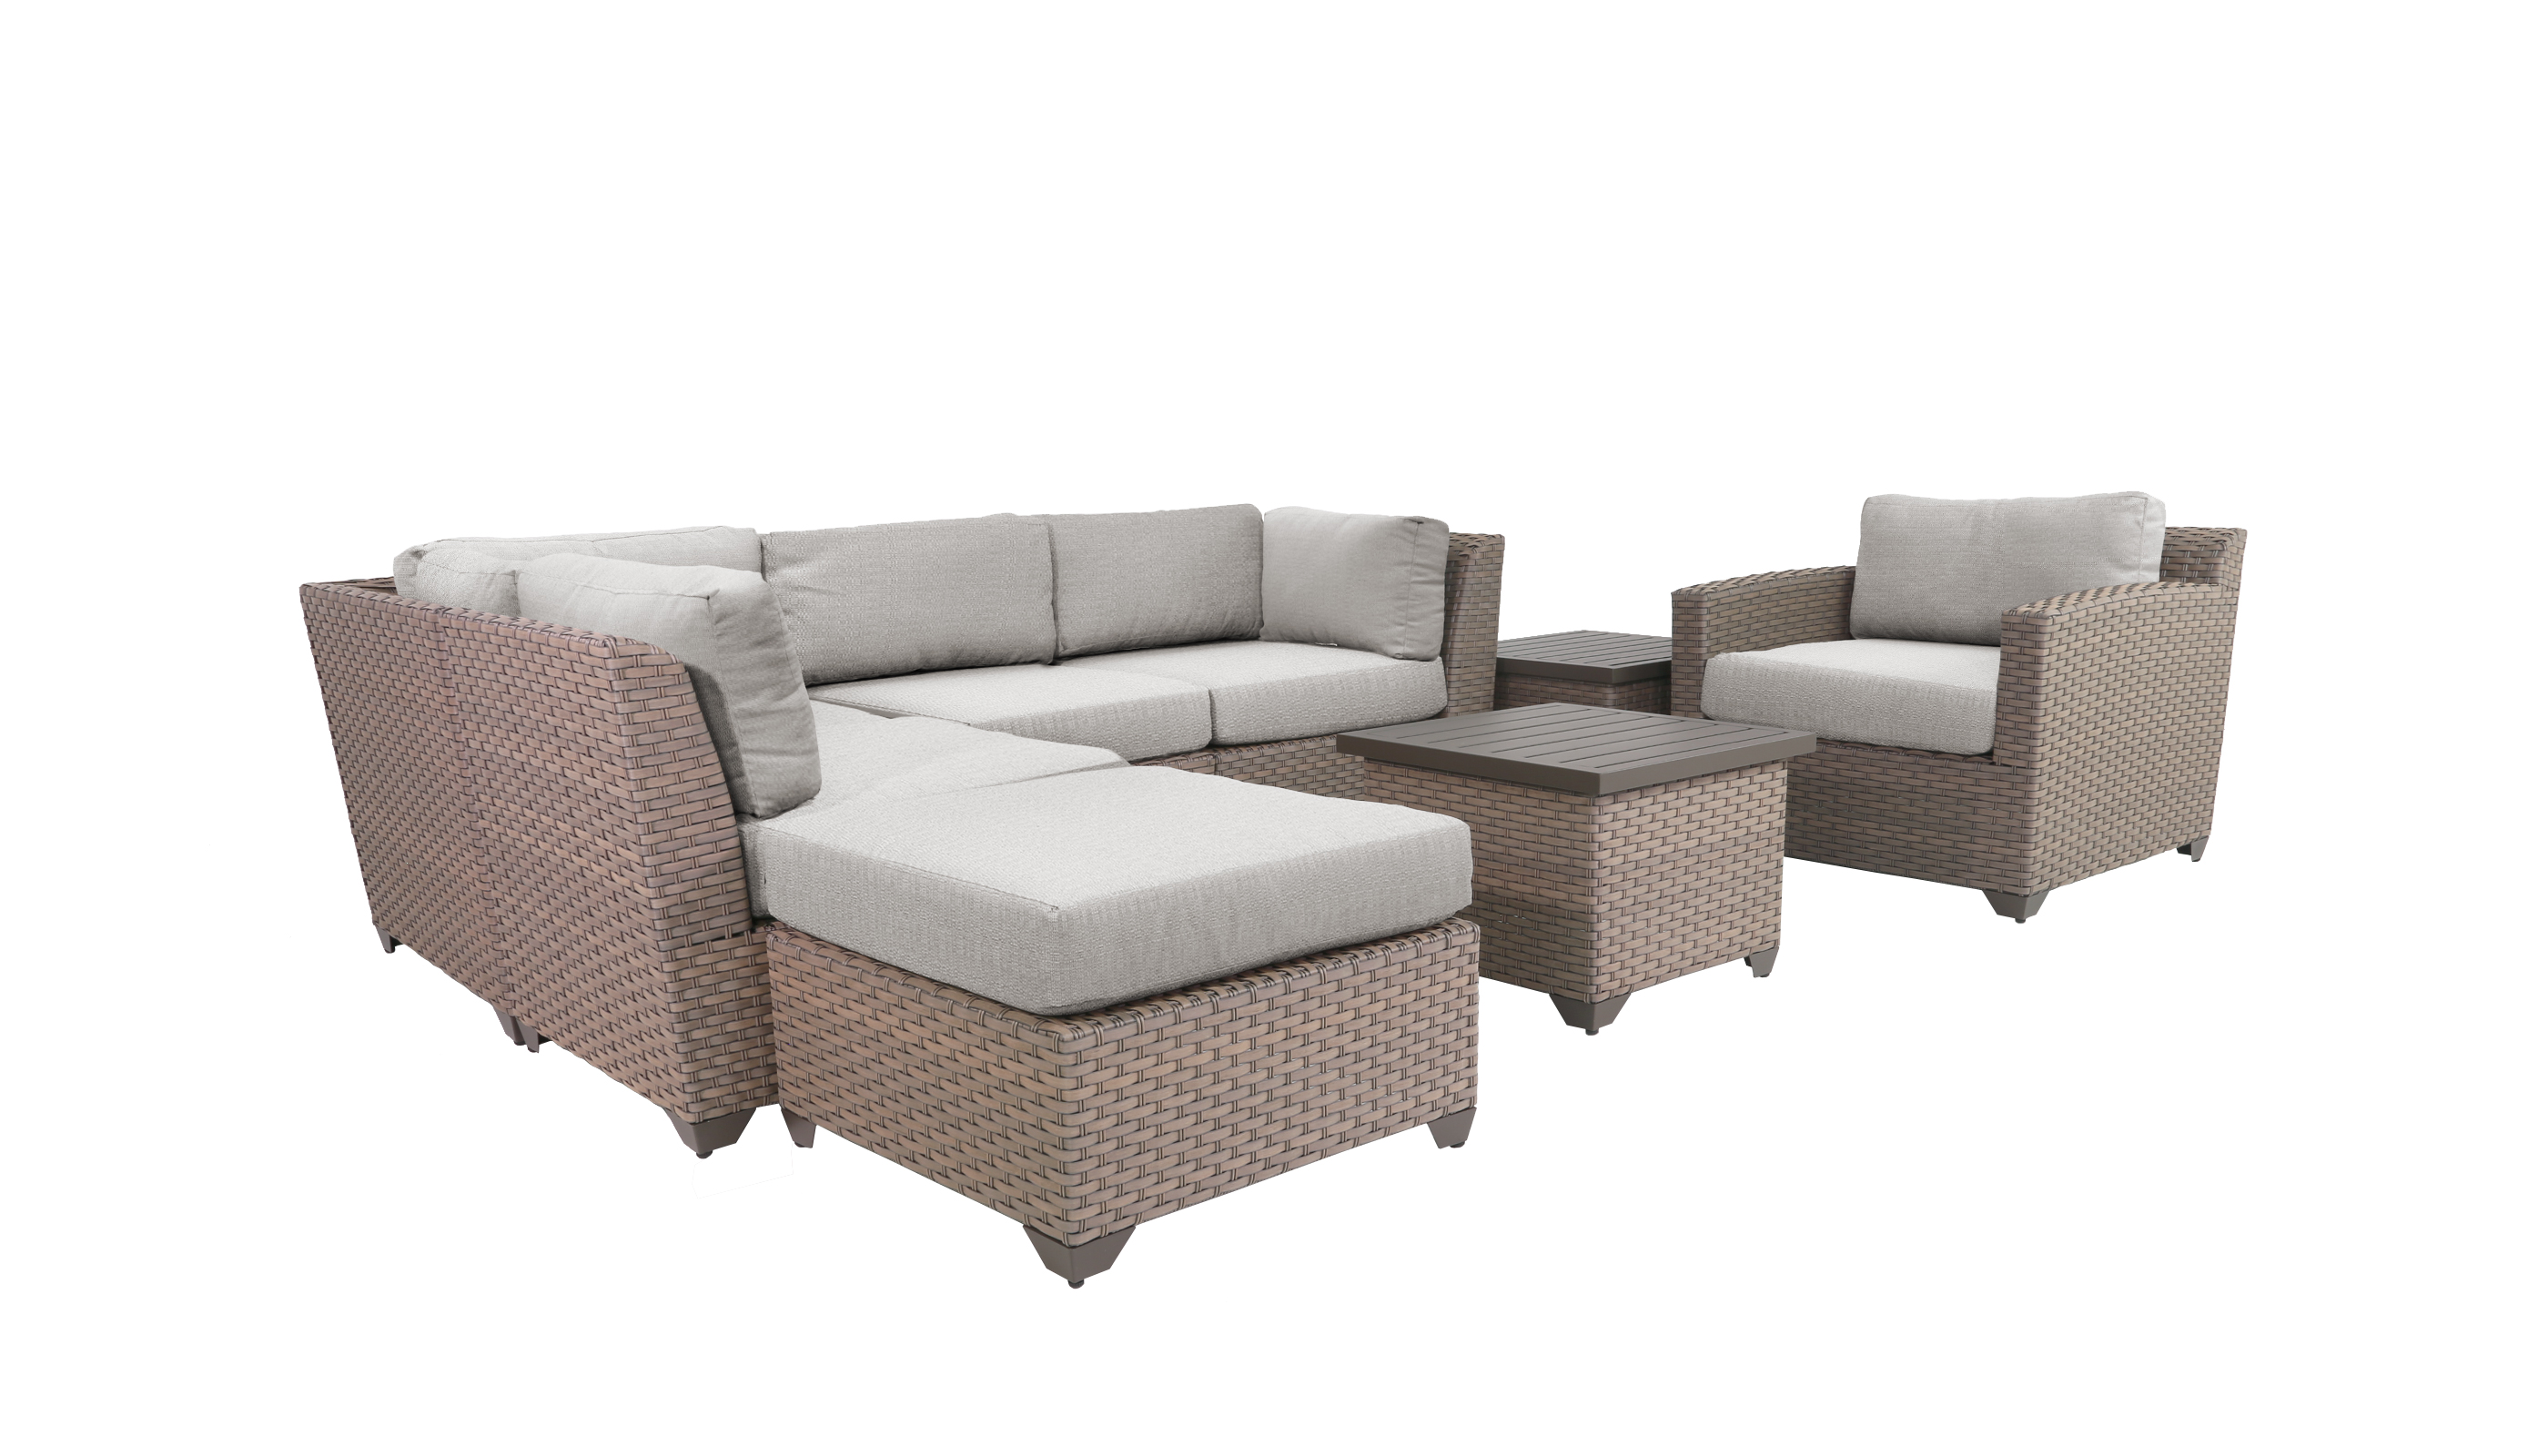 TK Classics Florence Wicker 8 Piece Patio Conversation Set with End Table and 2 Sets of Cushion Covers - image 4 of 11